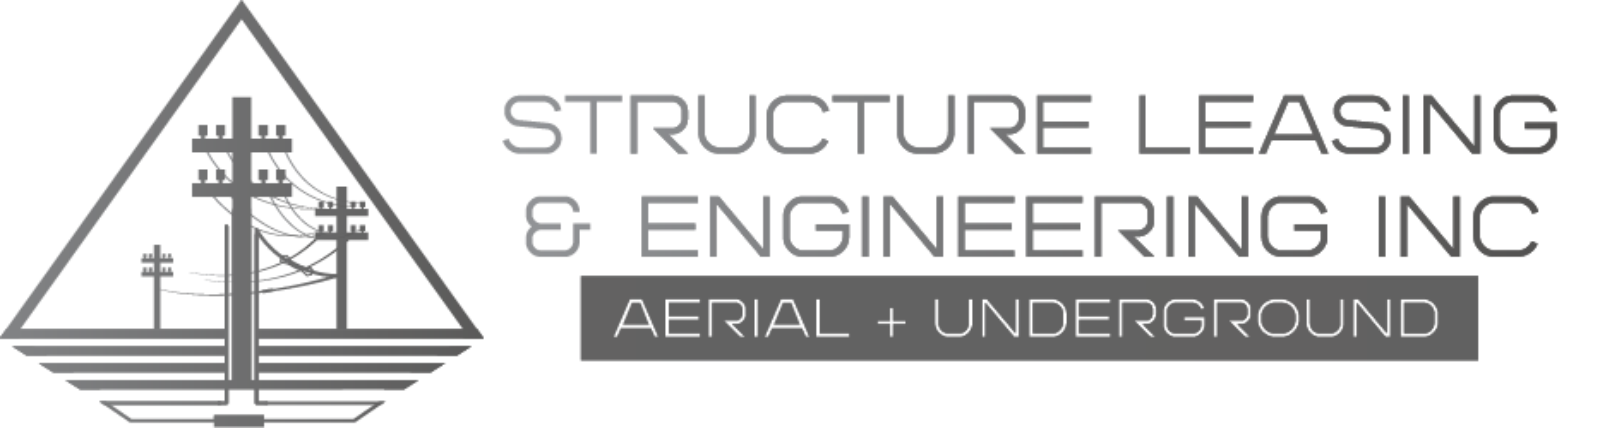 Structure Leasing & Engineering Inc.